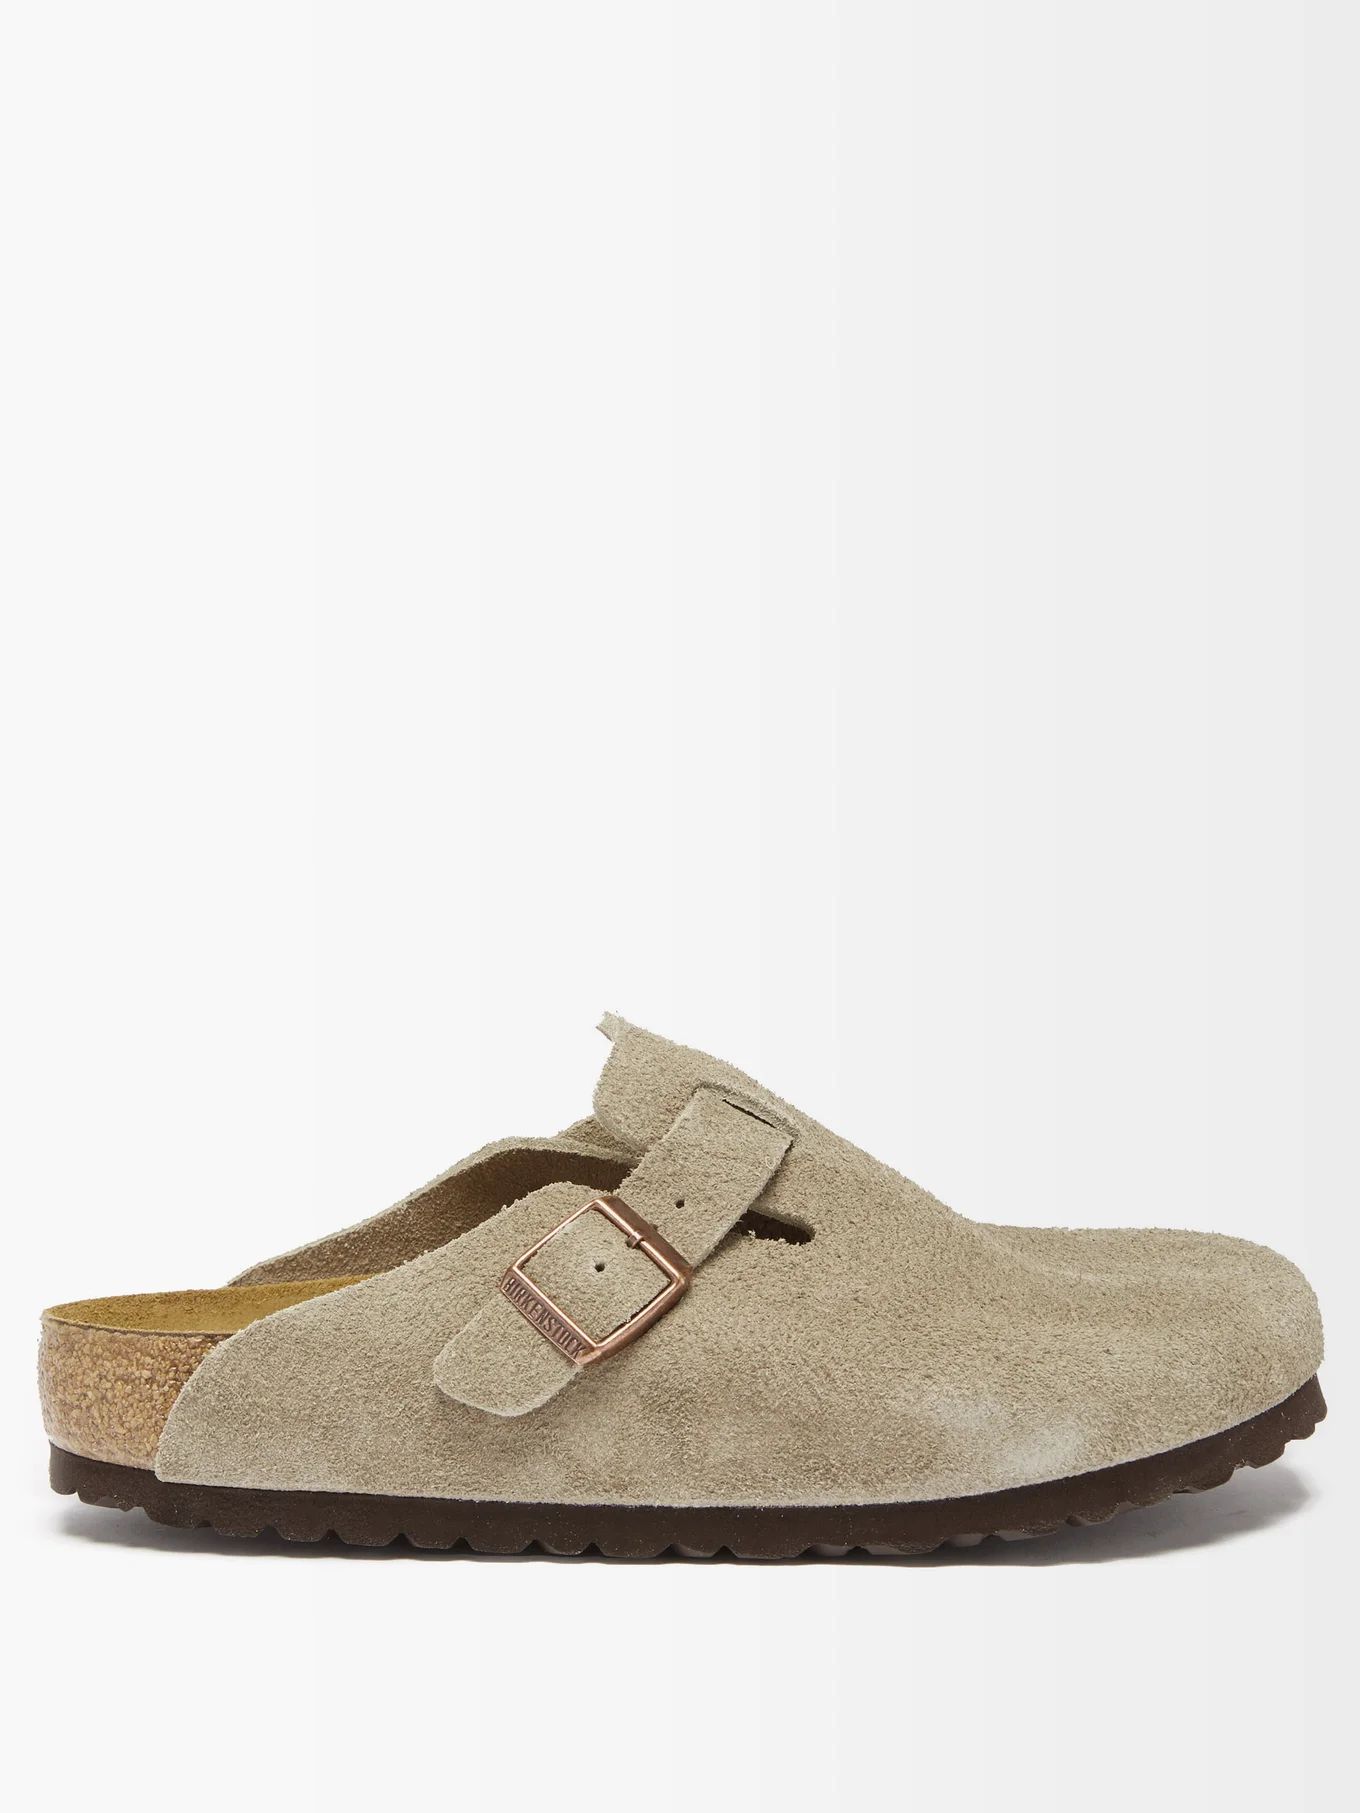 Boston suede clogs | Matches (APAC)